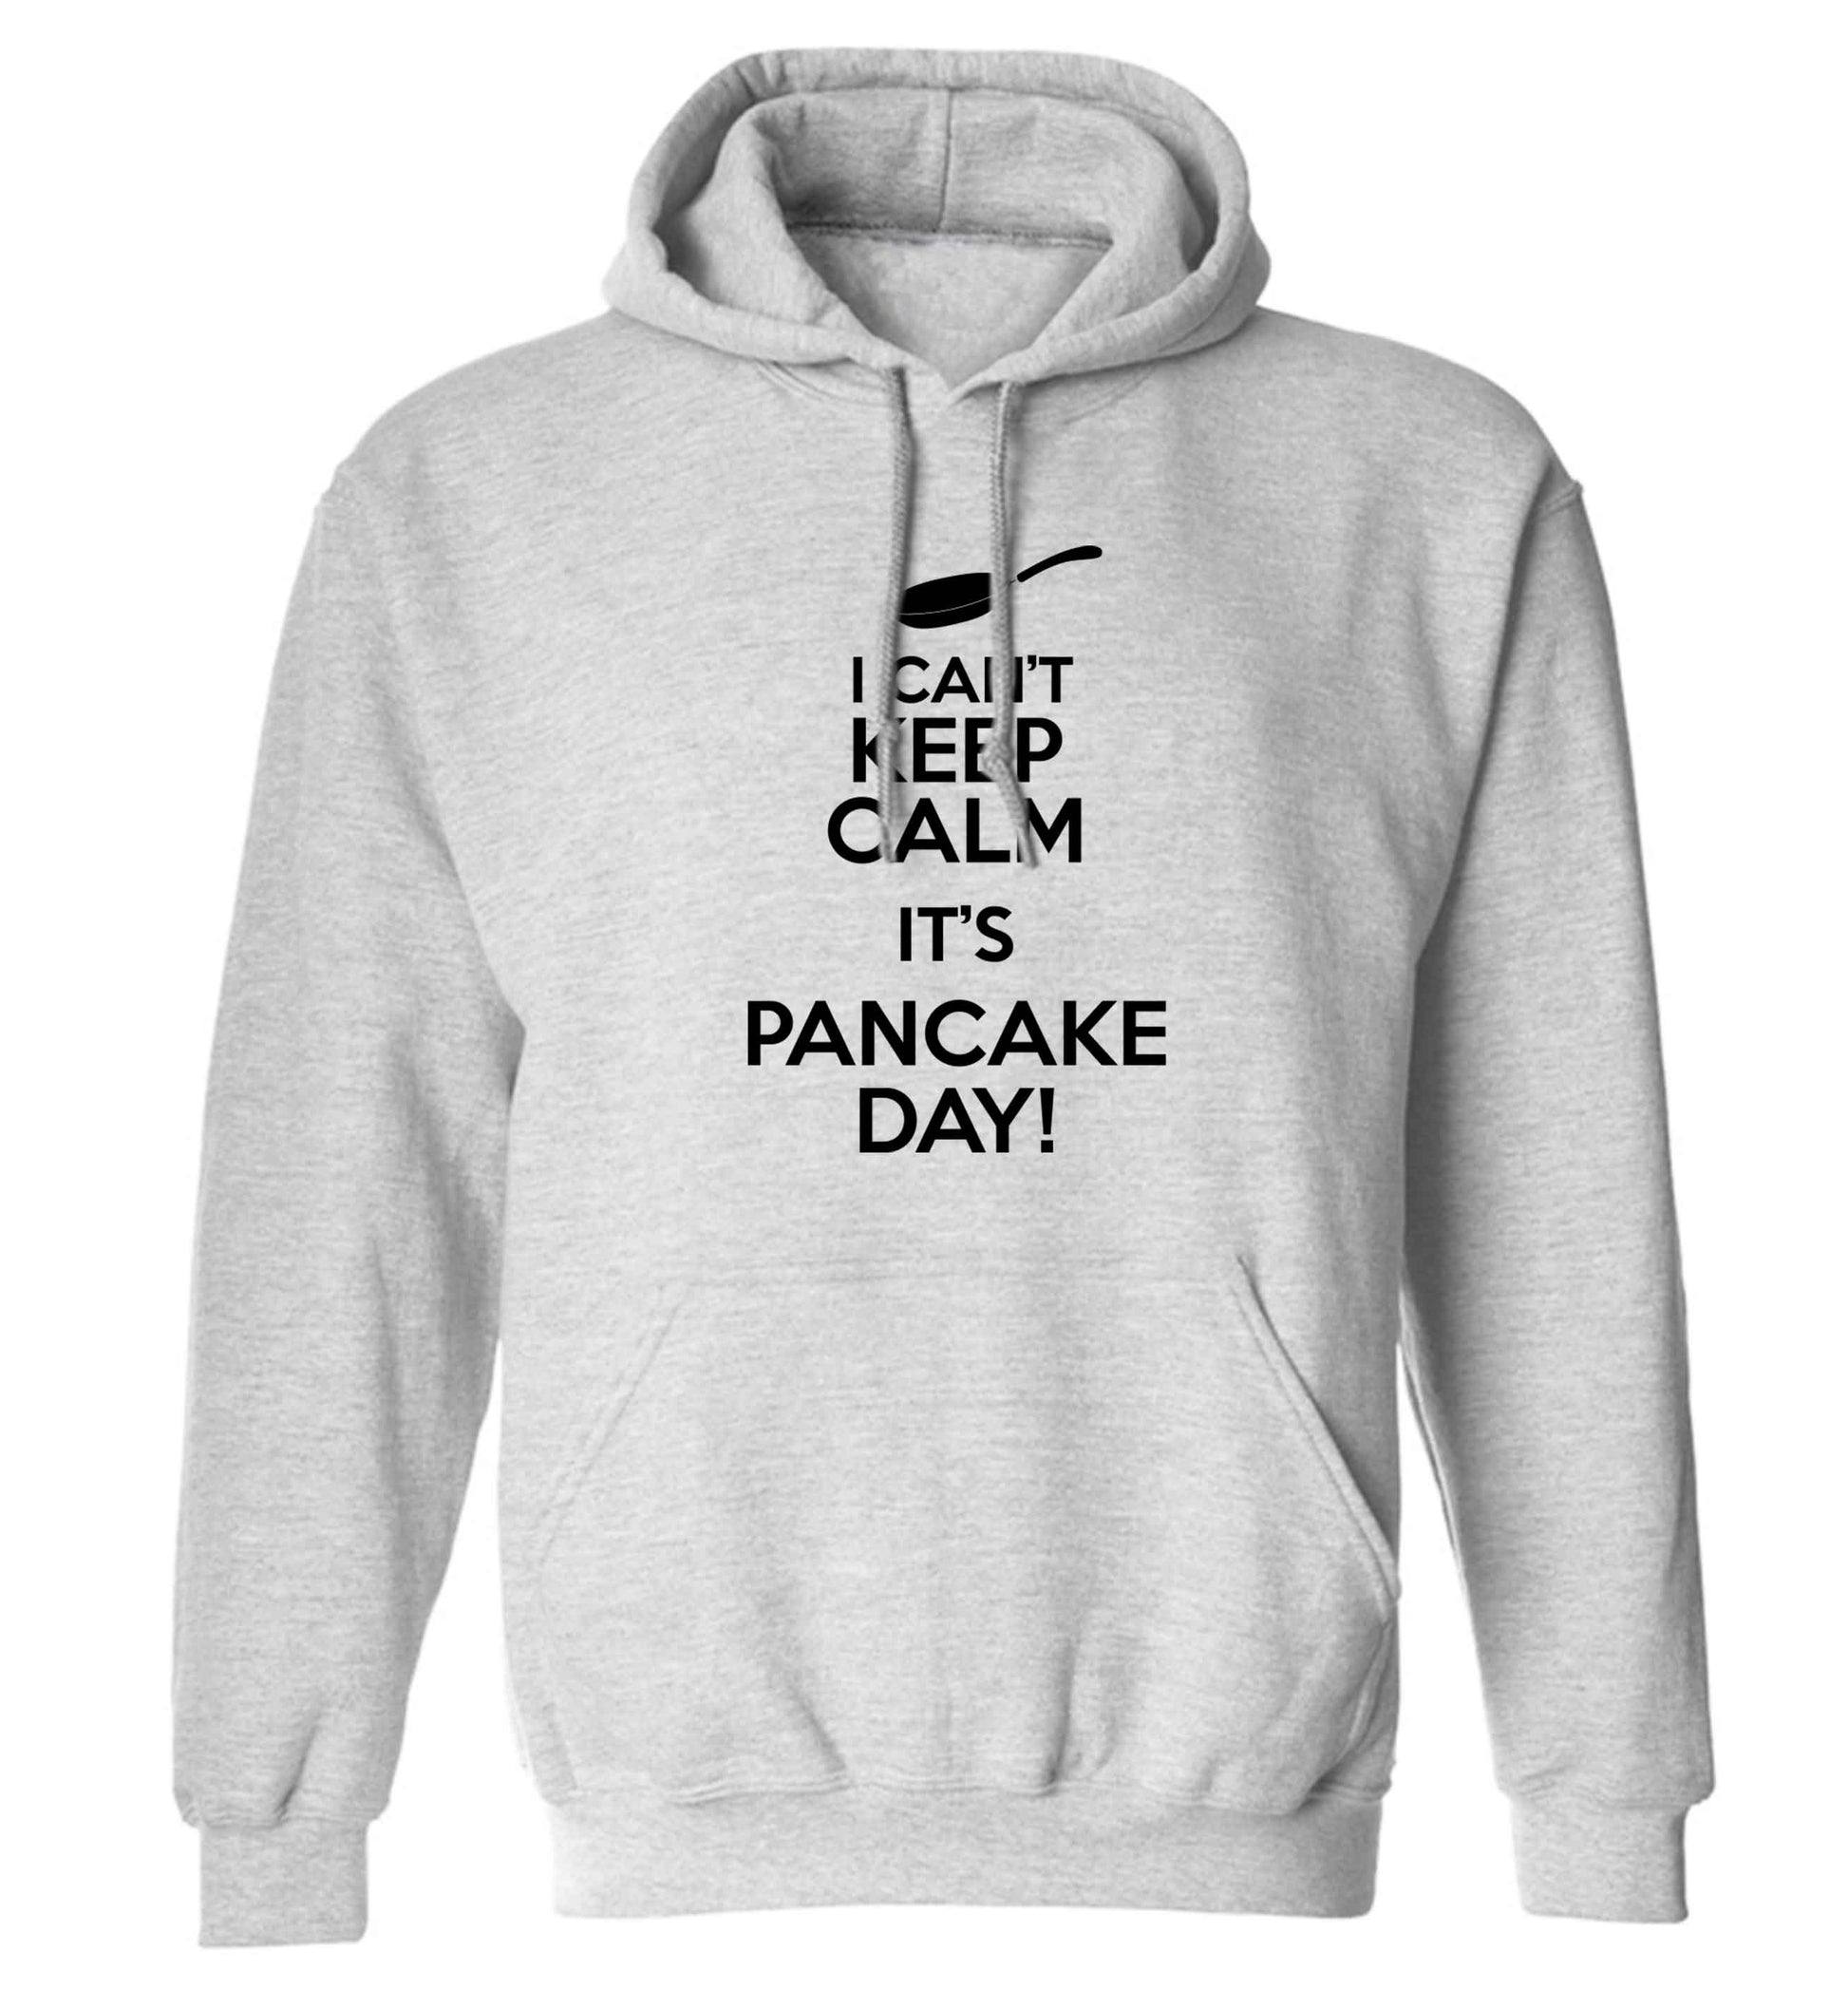 I can't keep calm it's pancake day! adults unisex grey hoodie 2XL